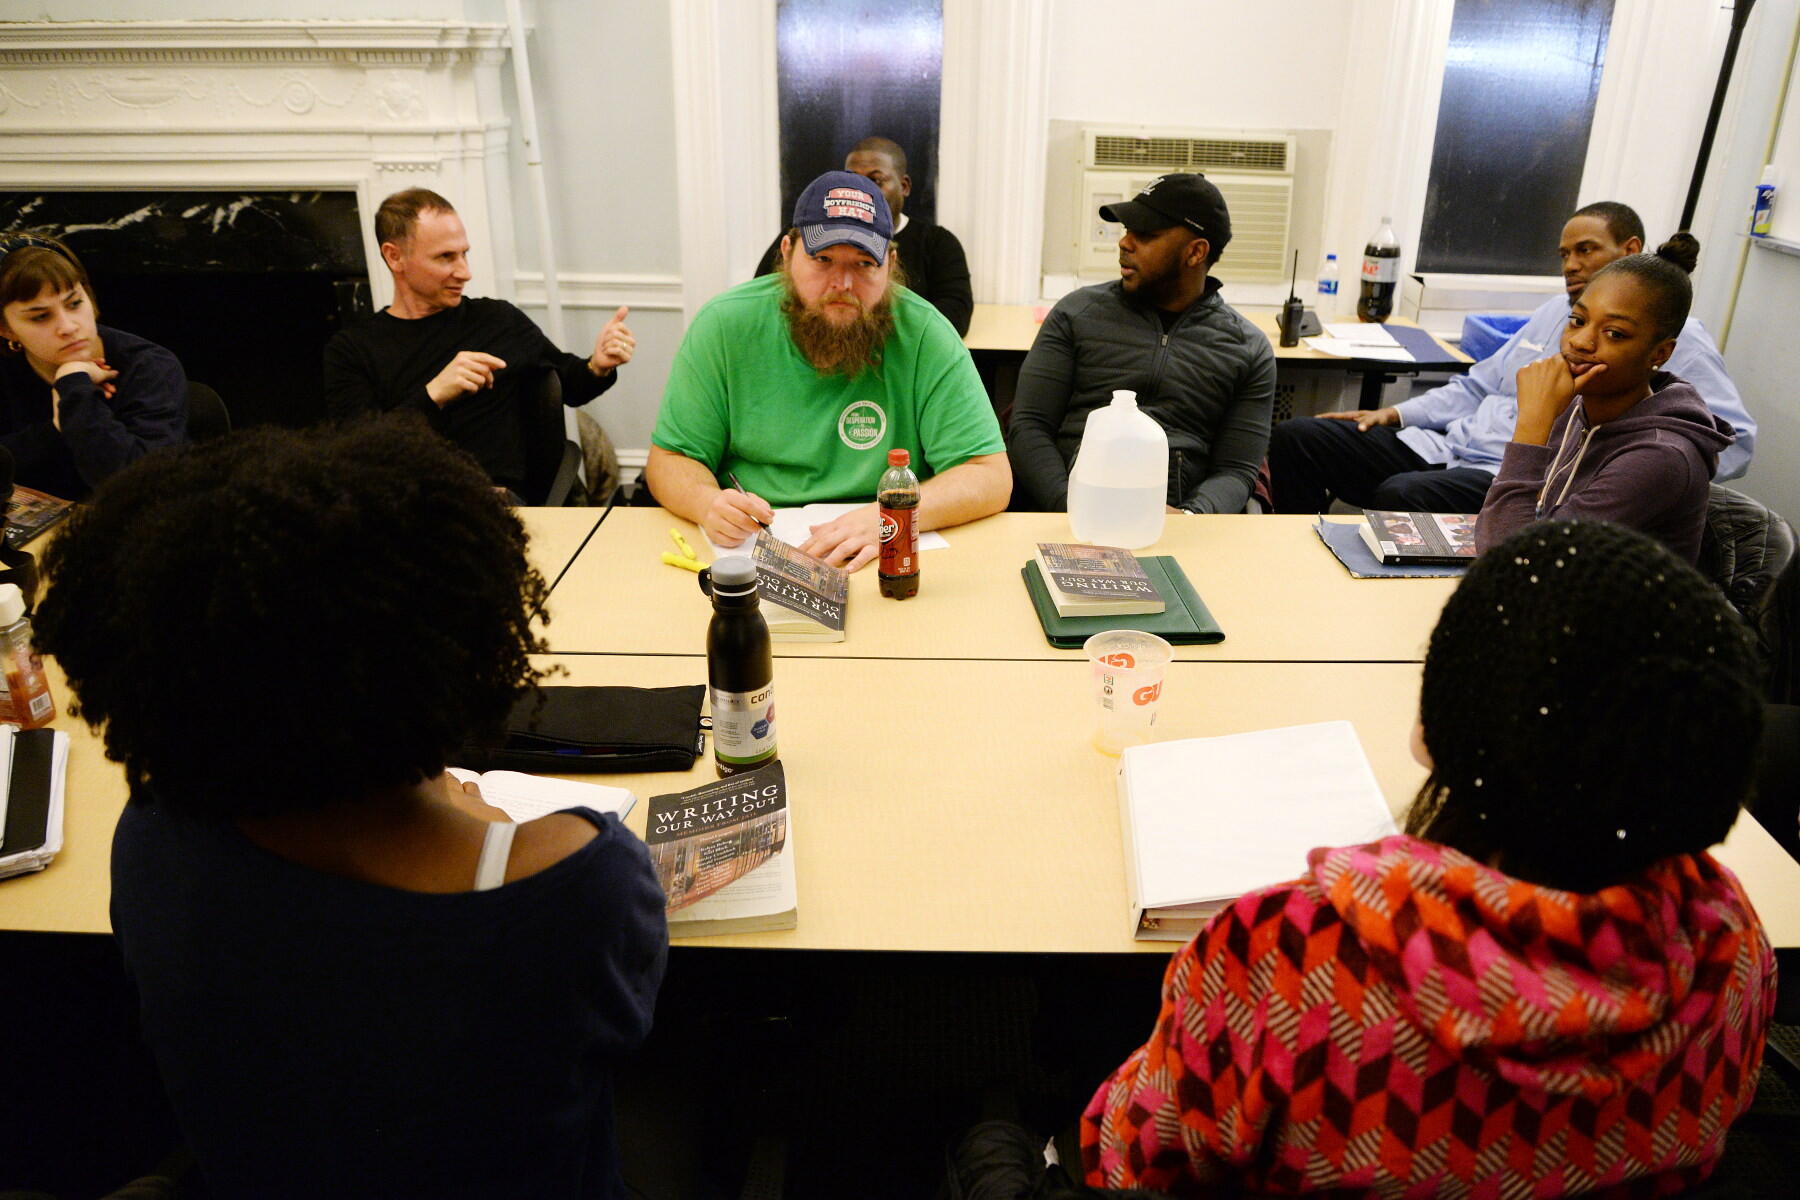 Writing Your Way Out came about through a new partnership between VCU's College of Humanities and Sciences and Richmond’s Office of the Commonwealth’s Attorney.